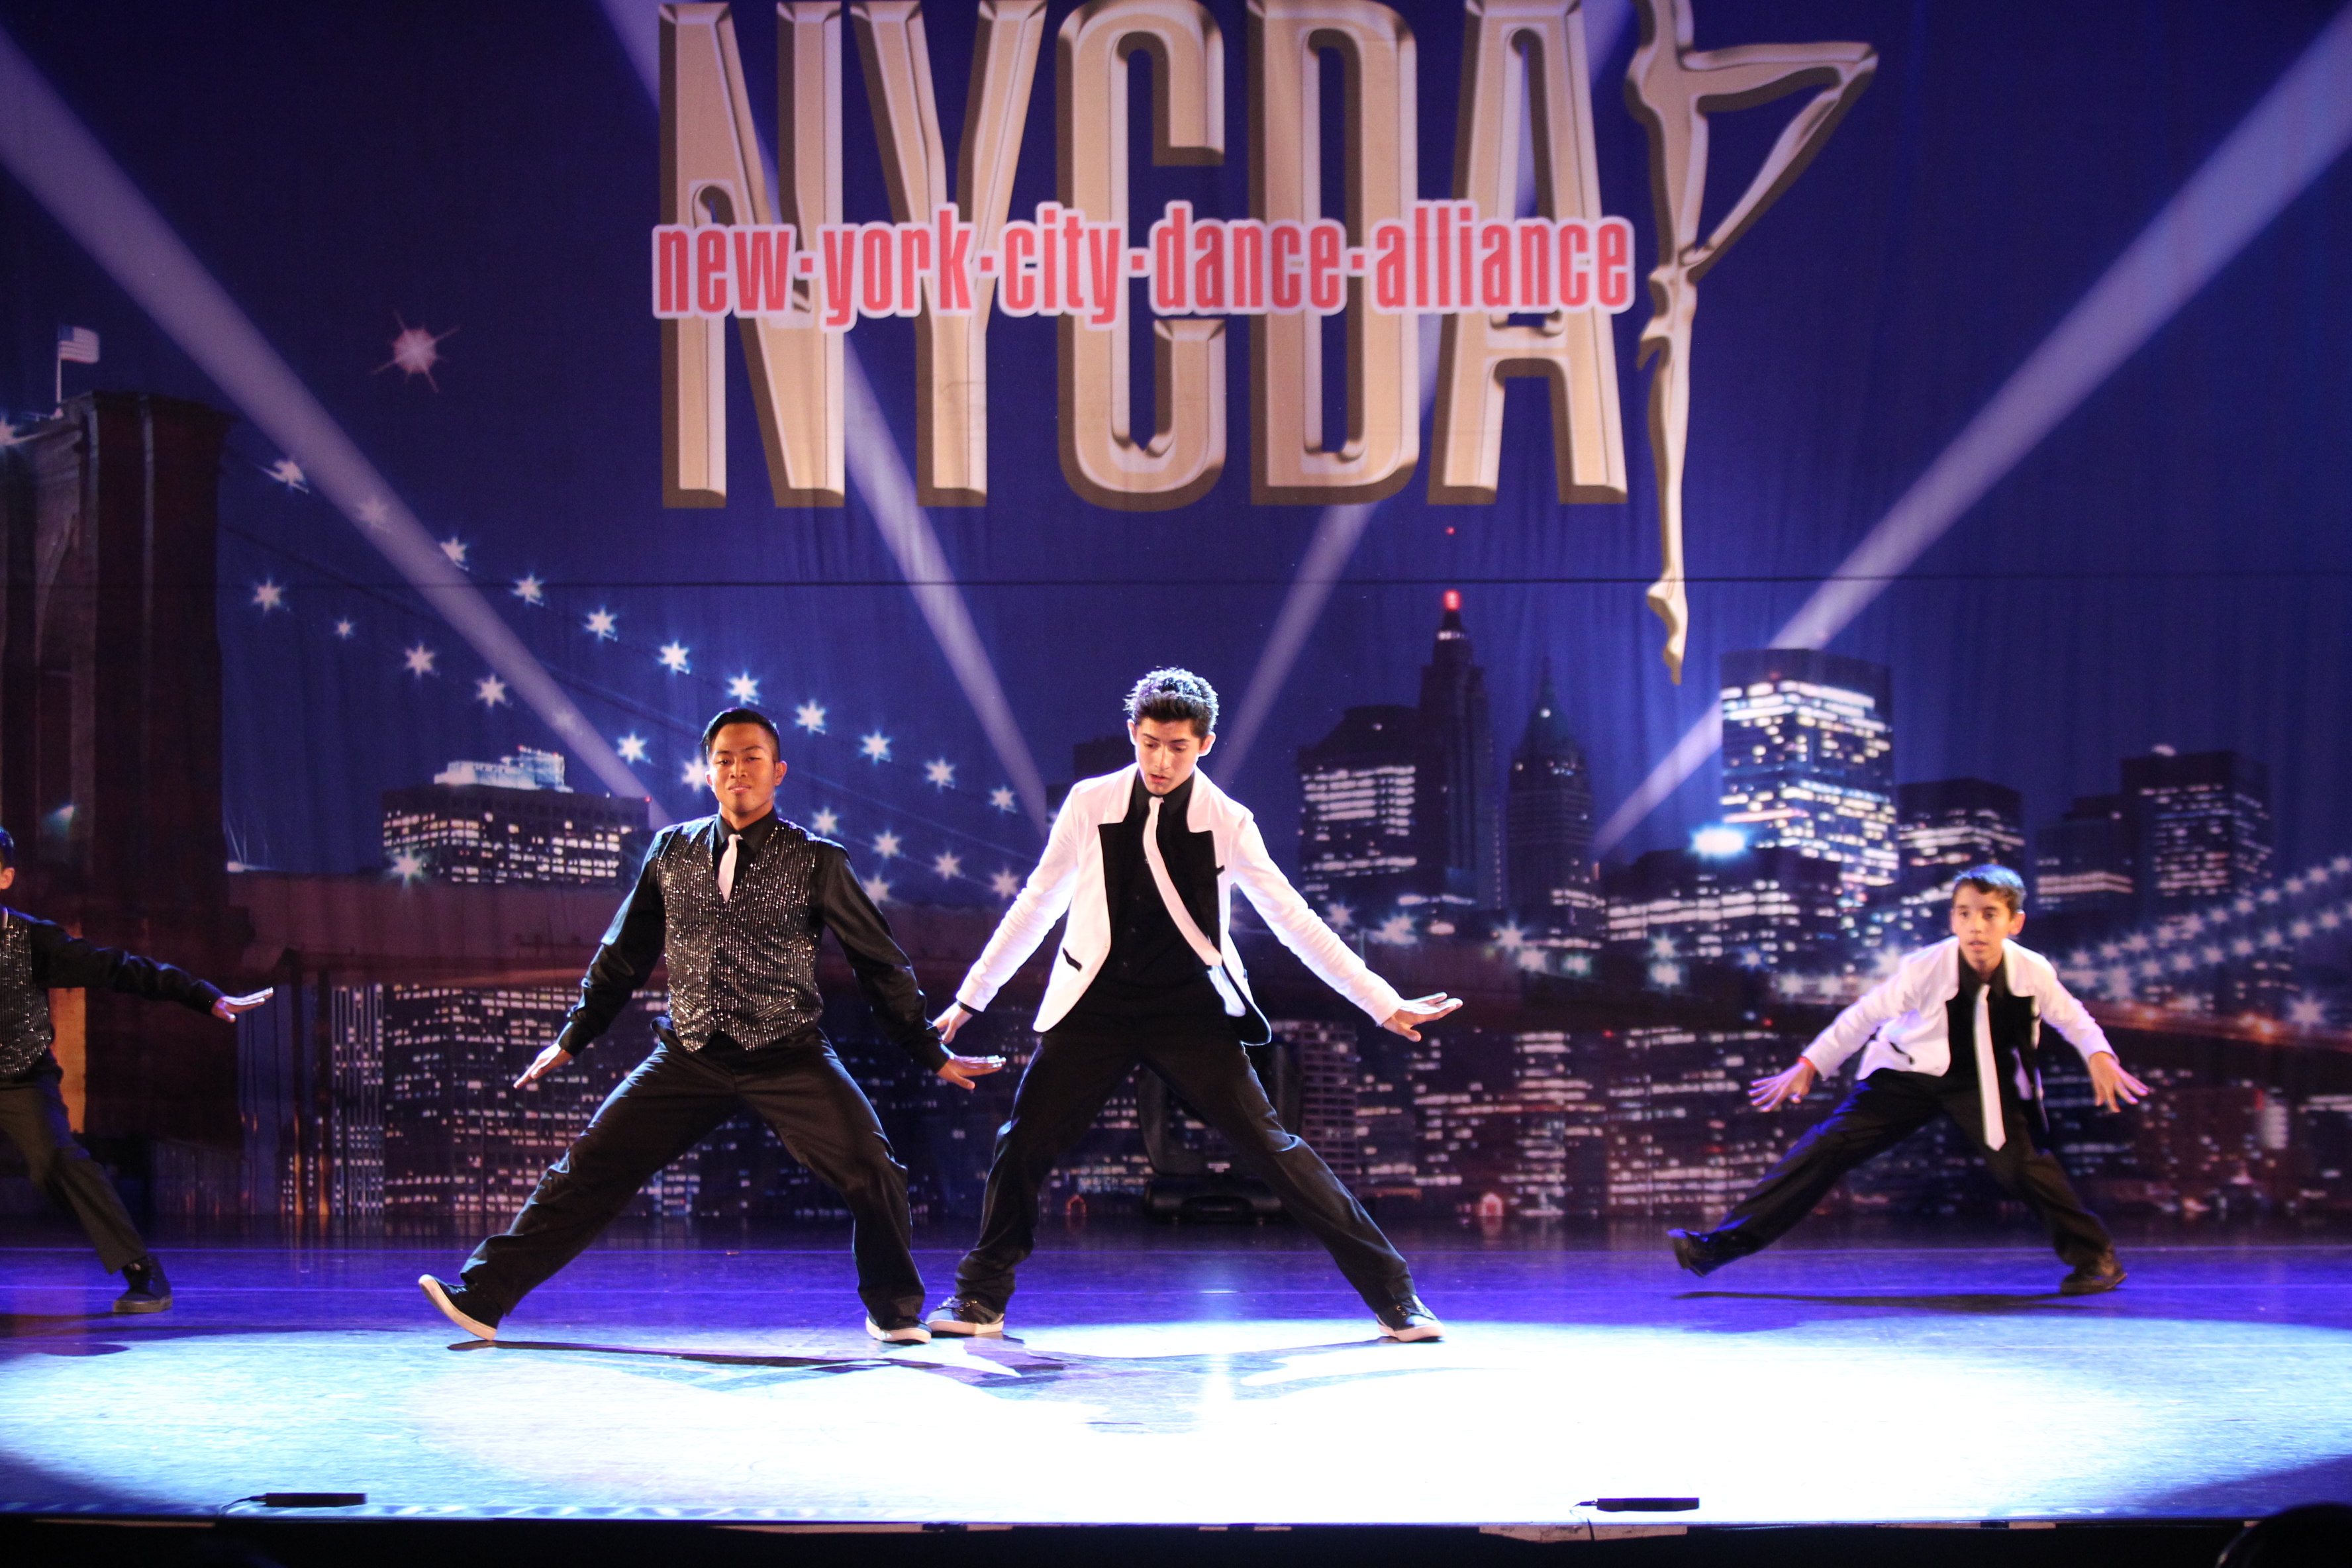 Ryder performing at the dance convention